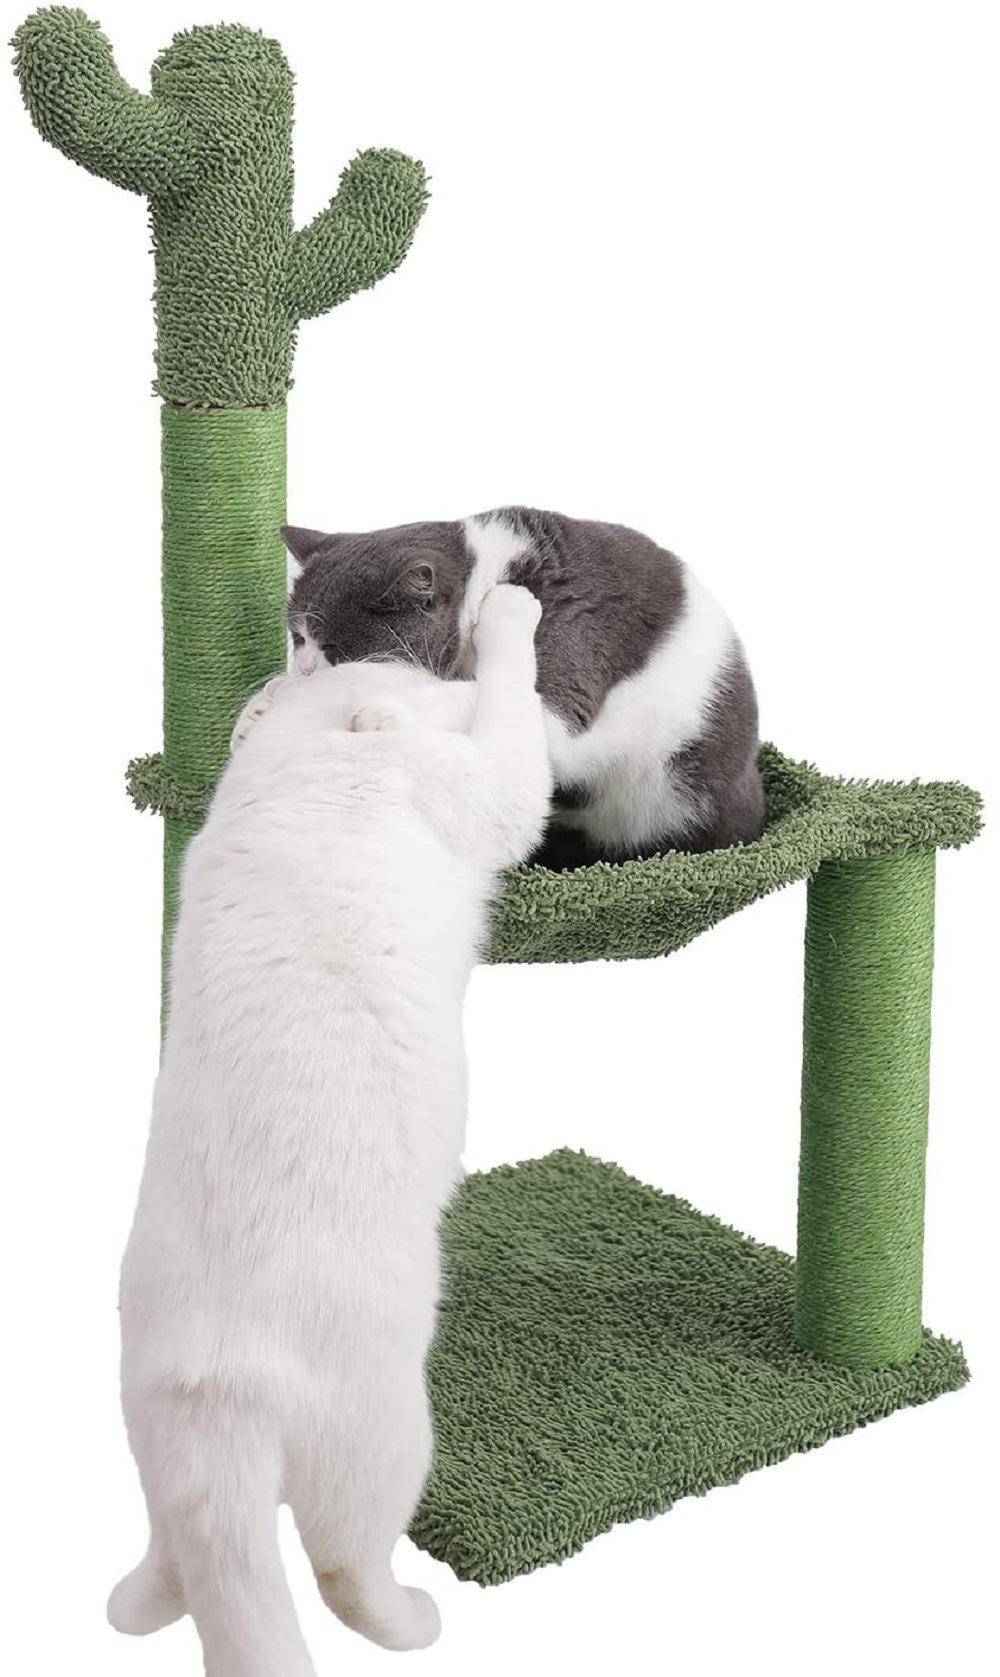 Full Wrapped Sisal Cactus Cat Tree Scratching Post with Hammock